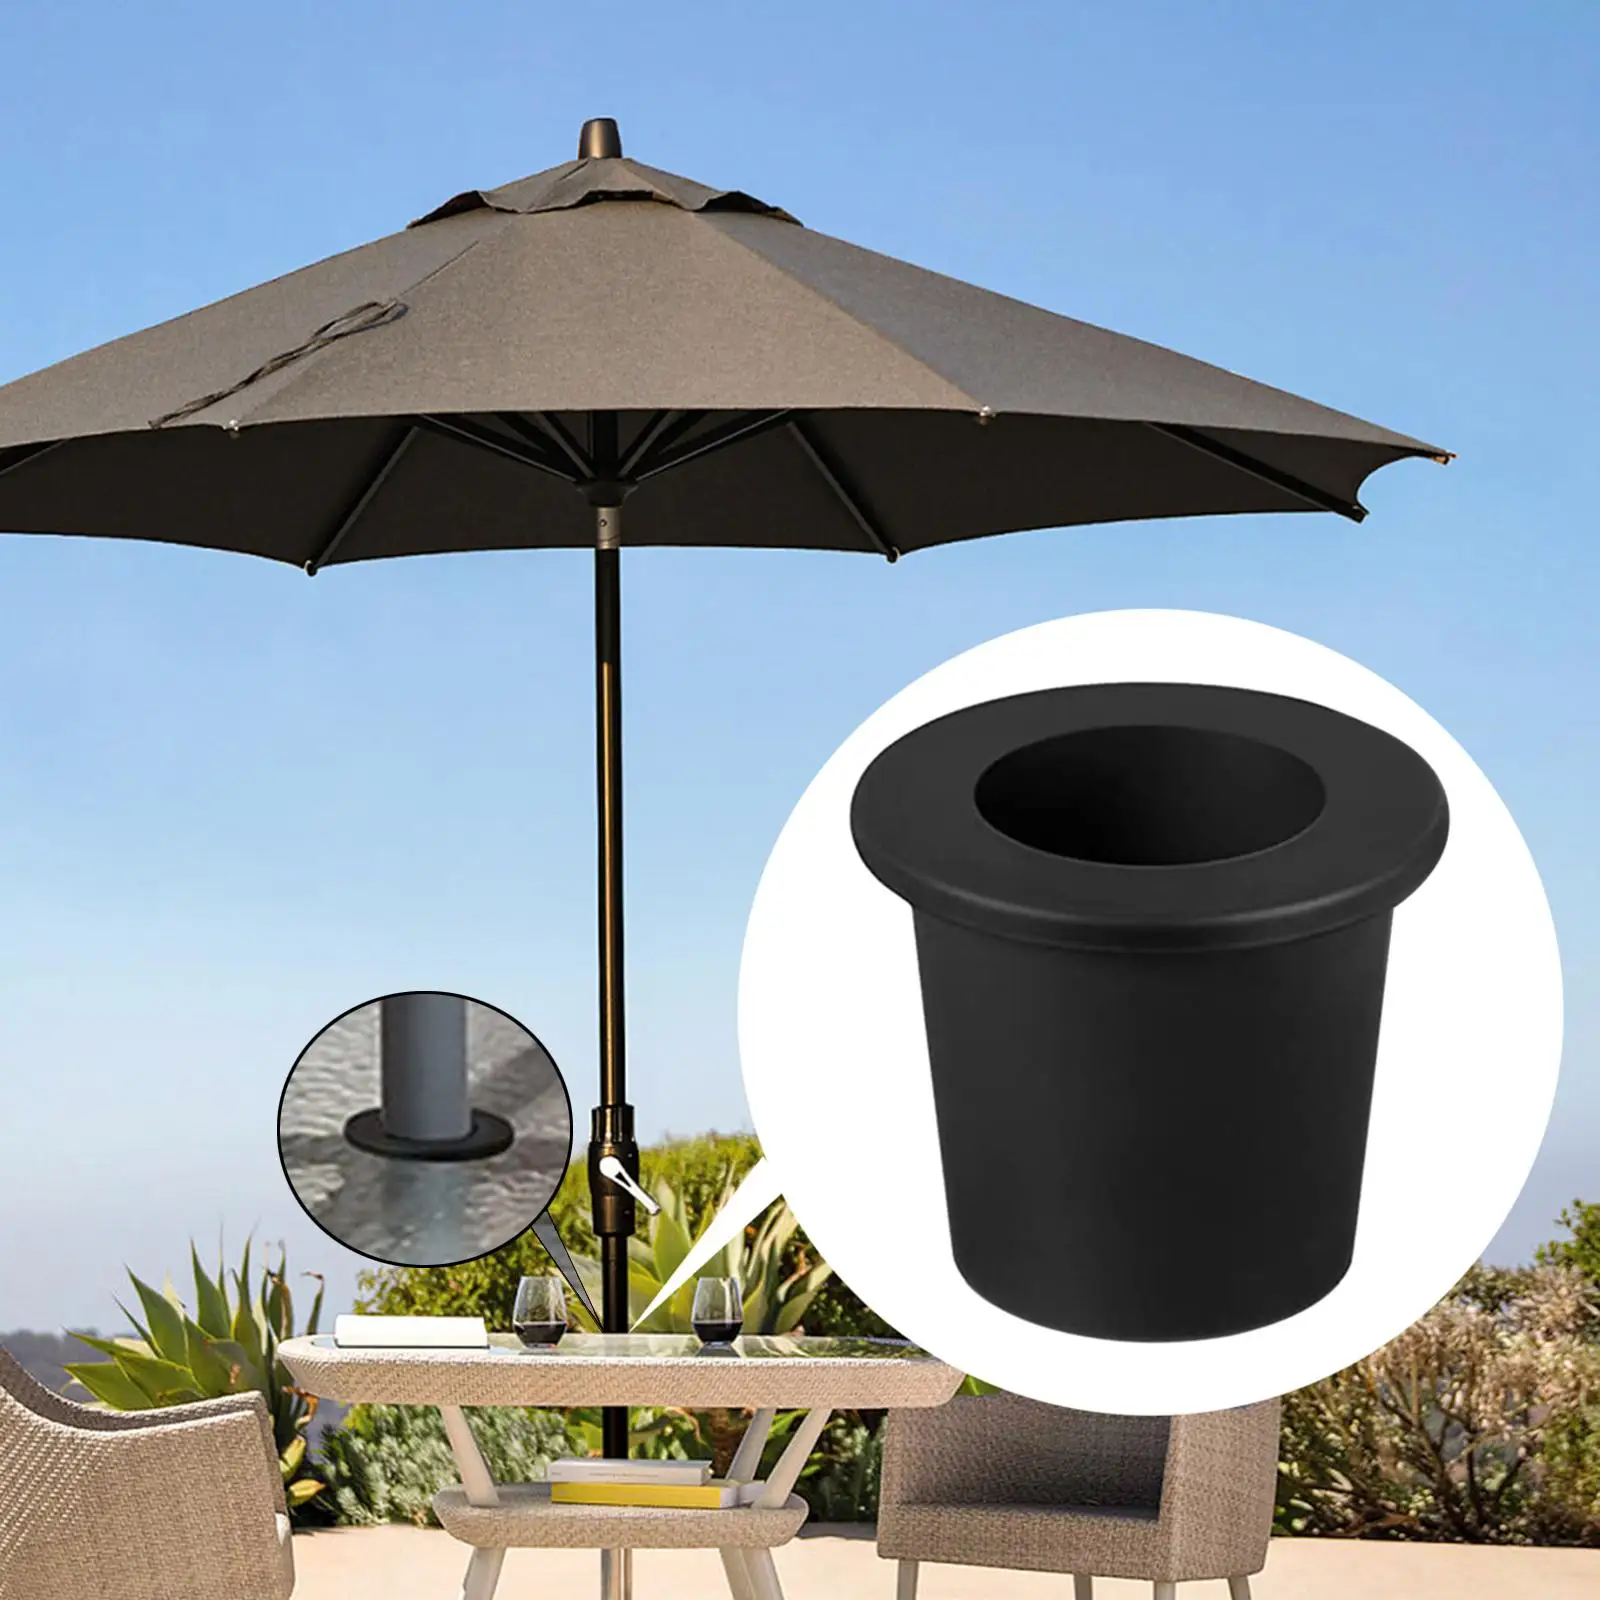 Umbrella Hole Ring for 2 to 2.5 inch Patio Table Hole Umbrella Hole Plug Umbrella Cone Wedge for Patio Deck Beach Yard Shop